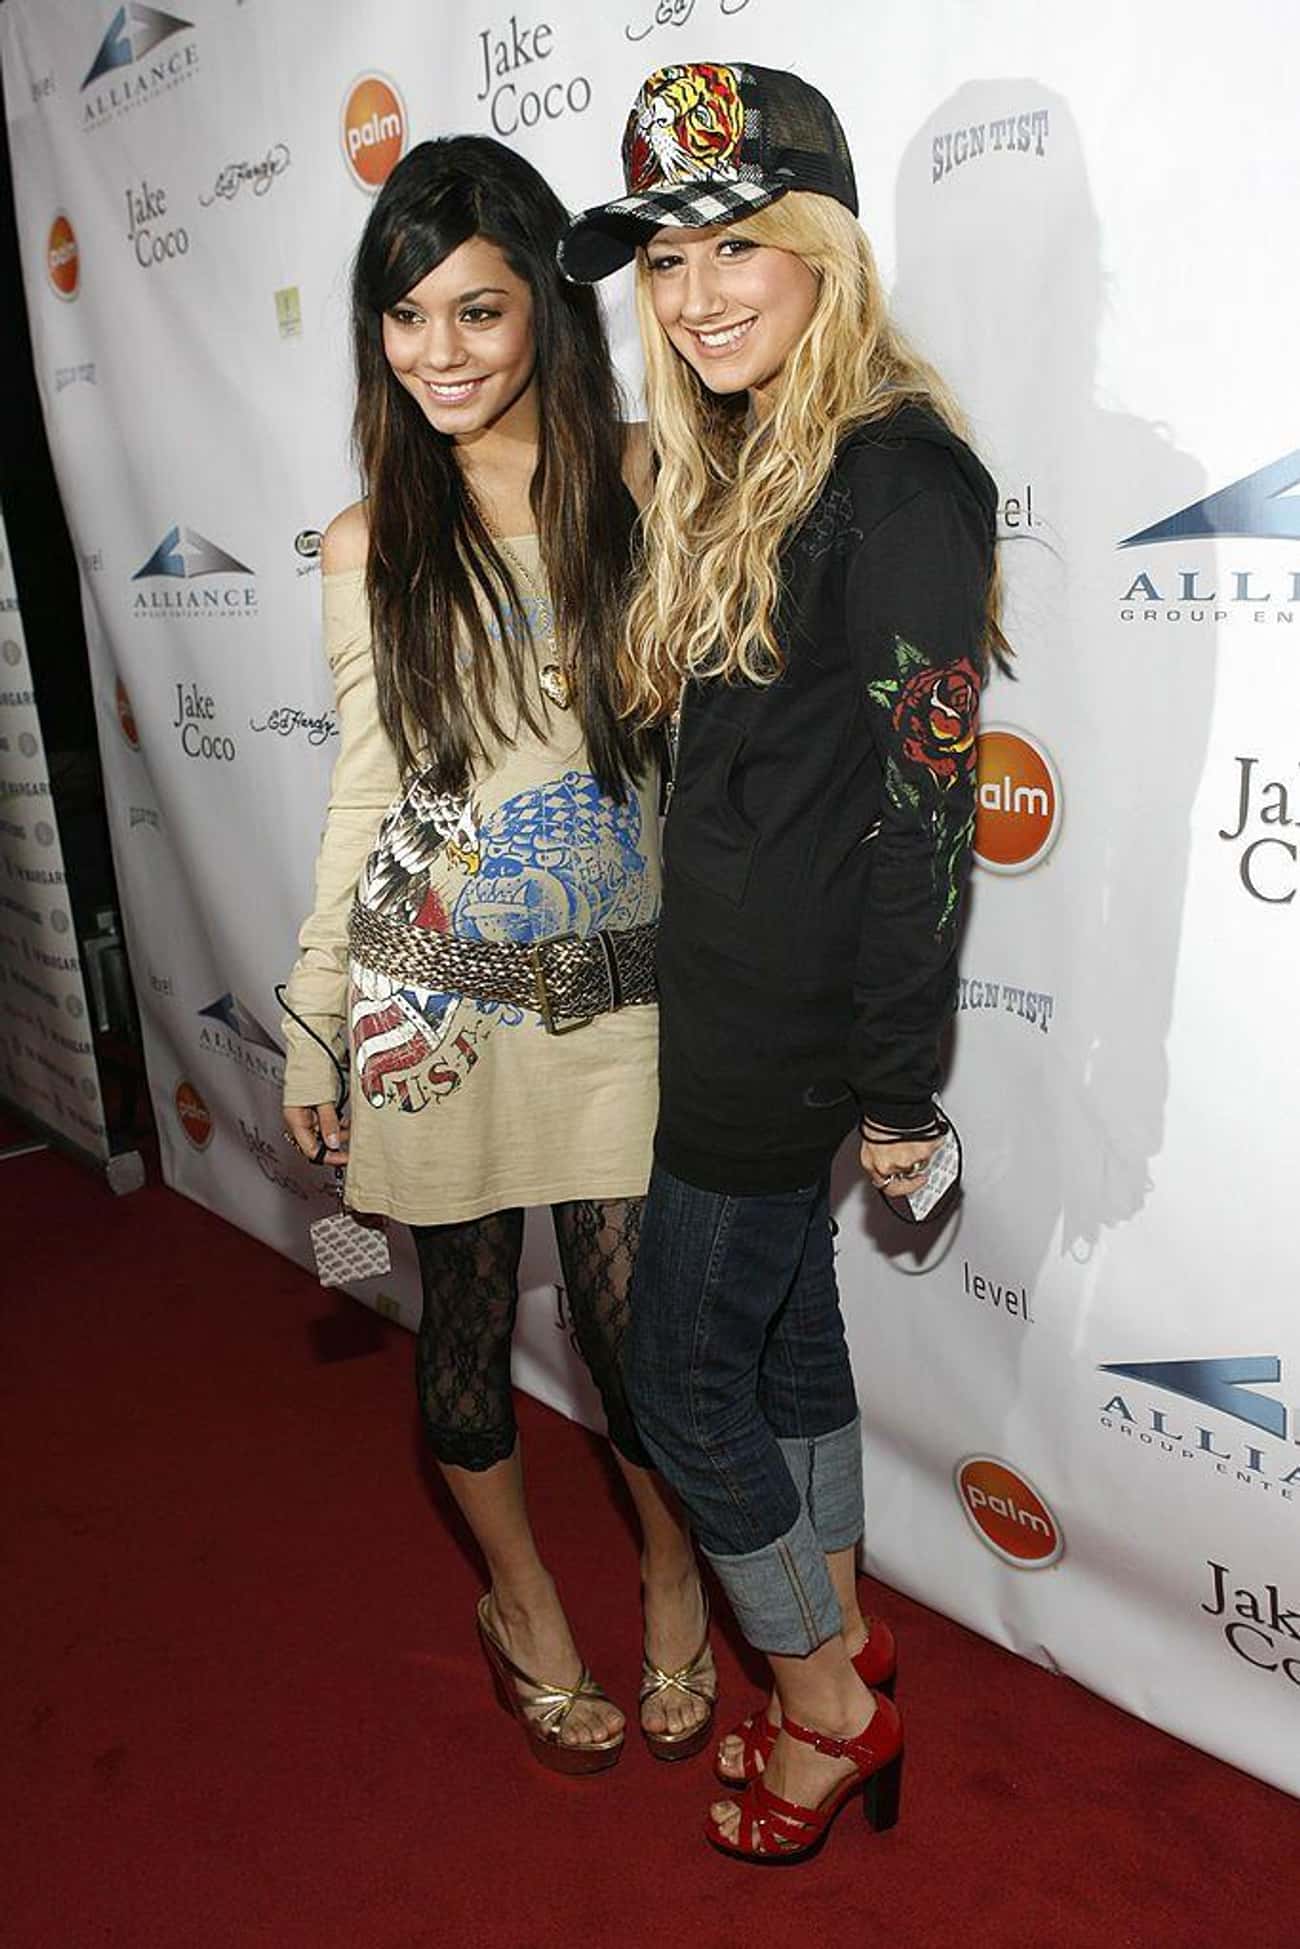 Vanessa Hudgens And Ashley Tisdale At An Event, 2006